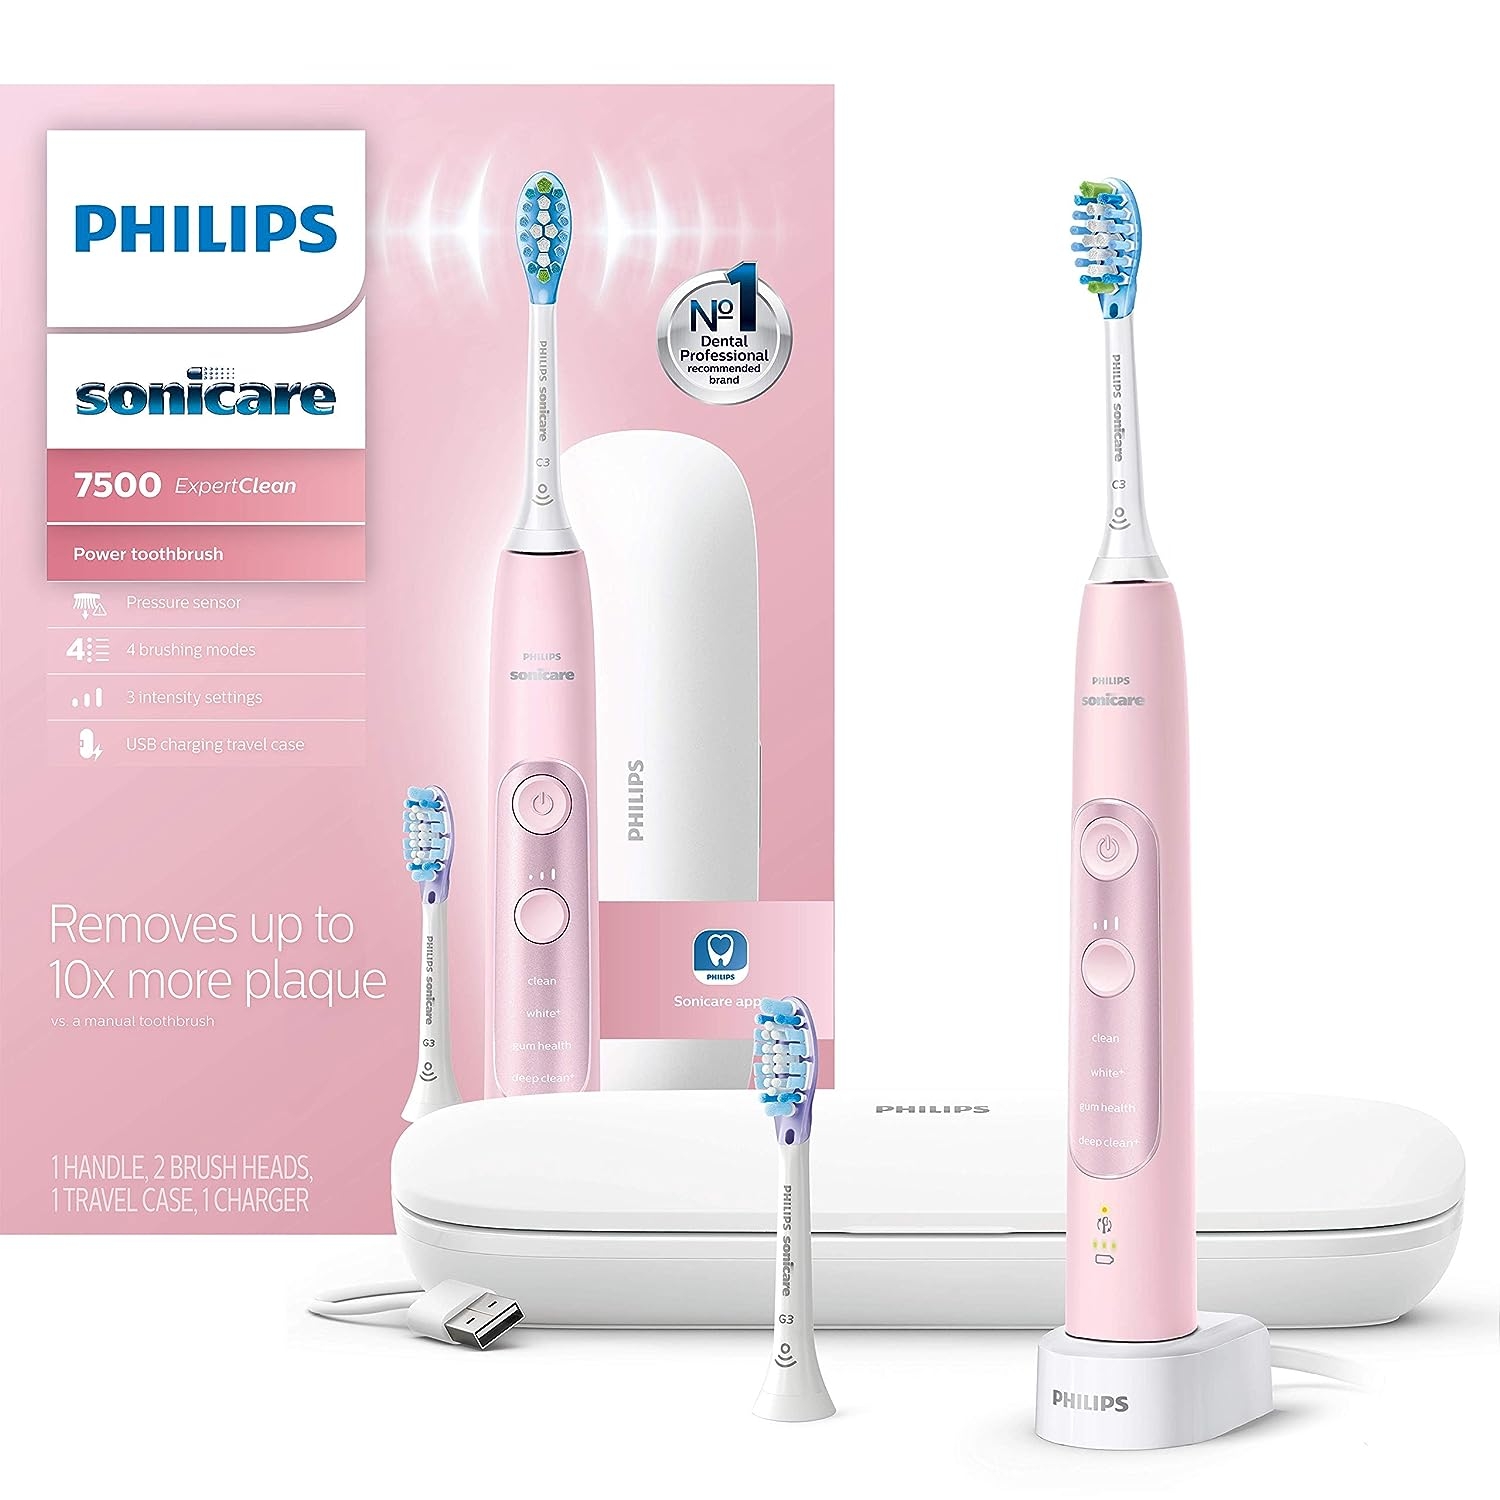 Philips Sonicare ExpertClean 7500, Rechargeable Electric Power Toothbrush, White, HX9690/06   price checker   price checker